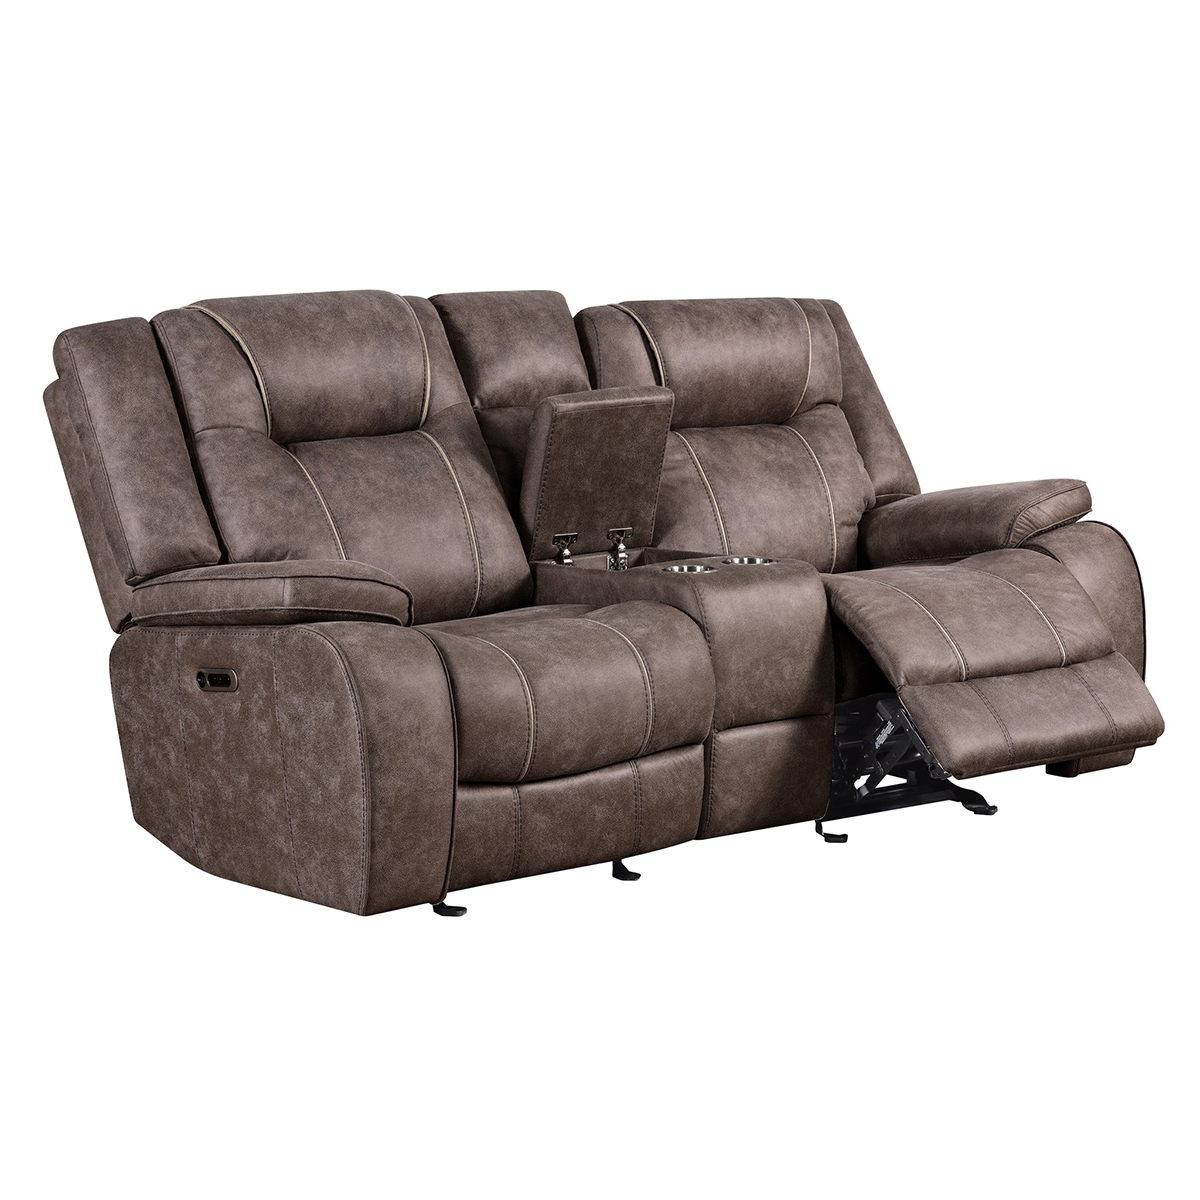 Picture of SHELTON MANUAL BROWN LOVESEAT